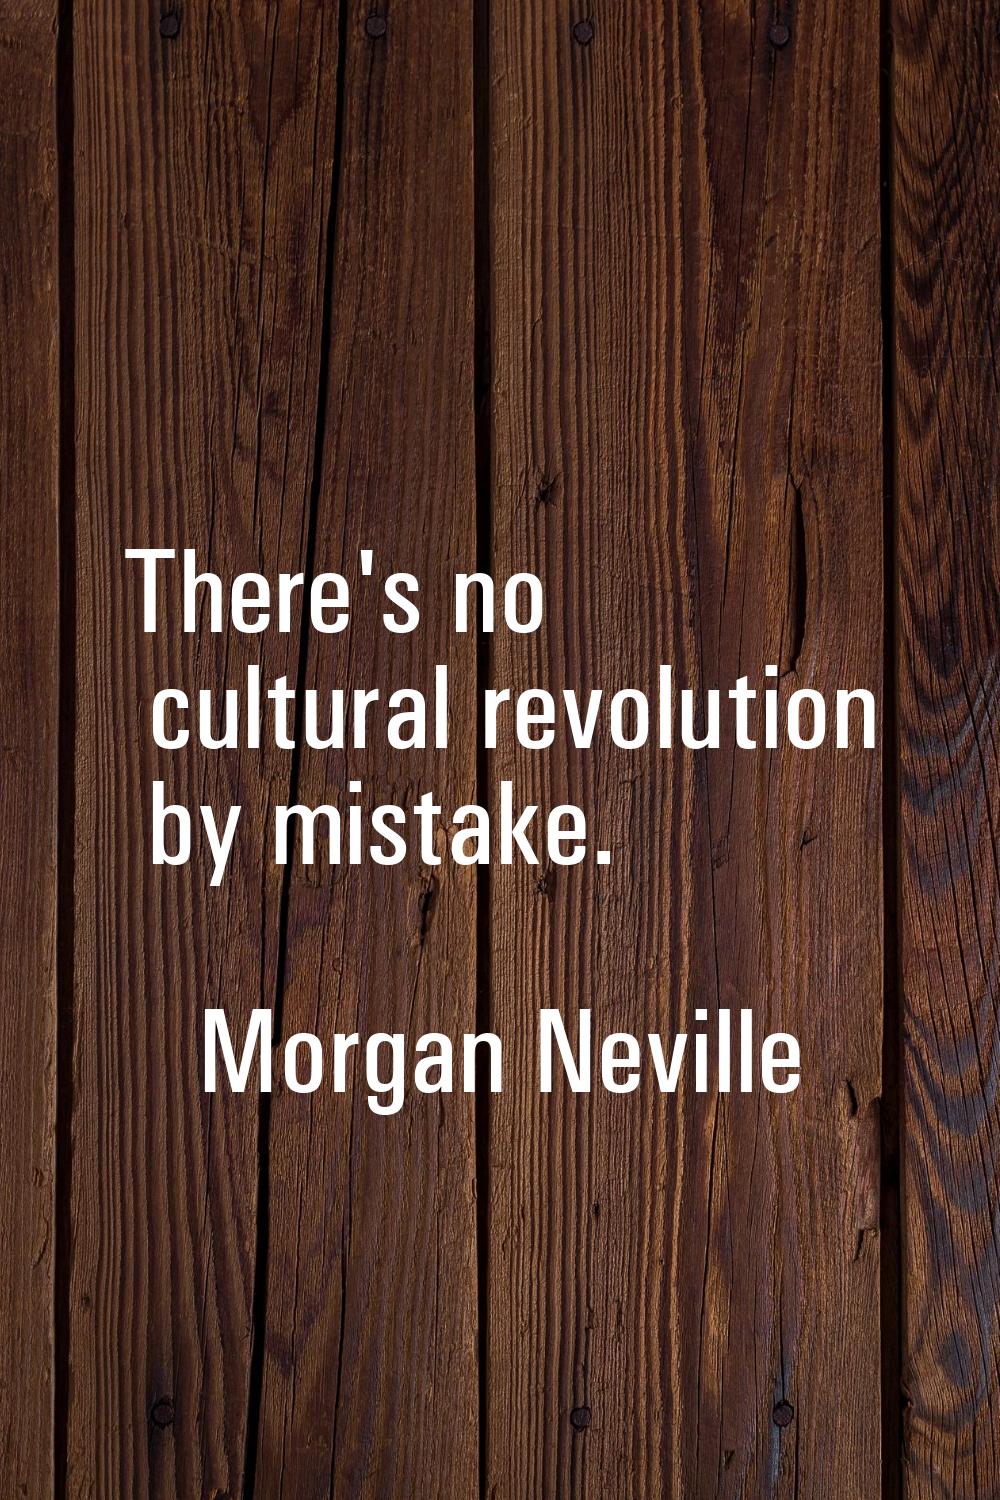 There's no cultural revolution by mistake.